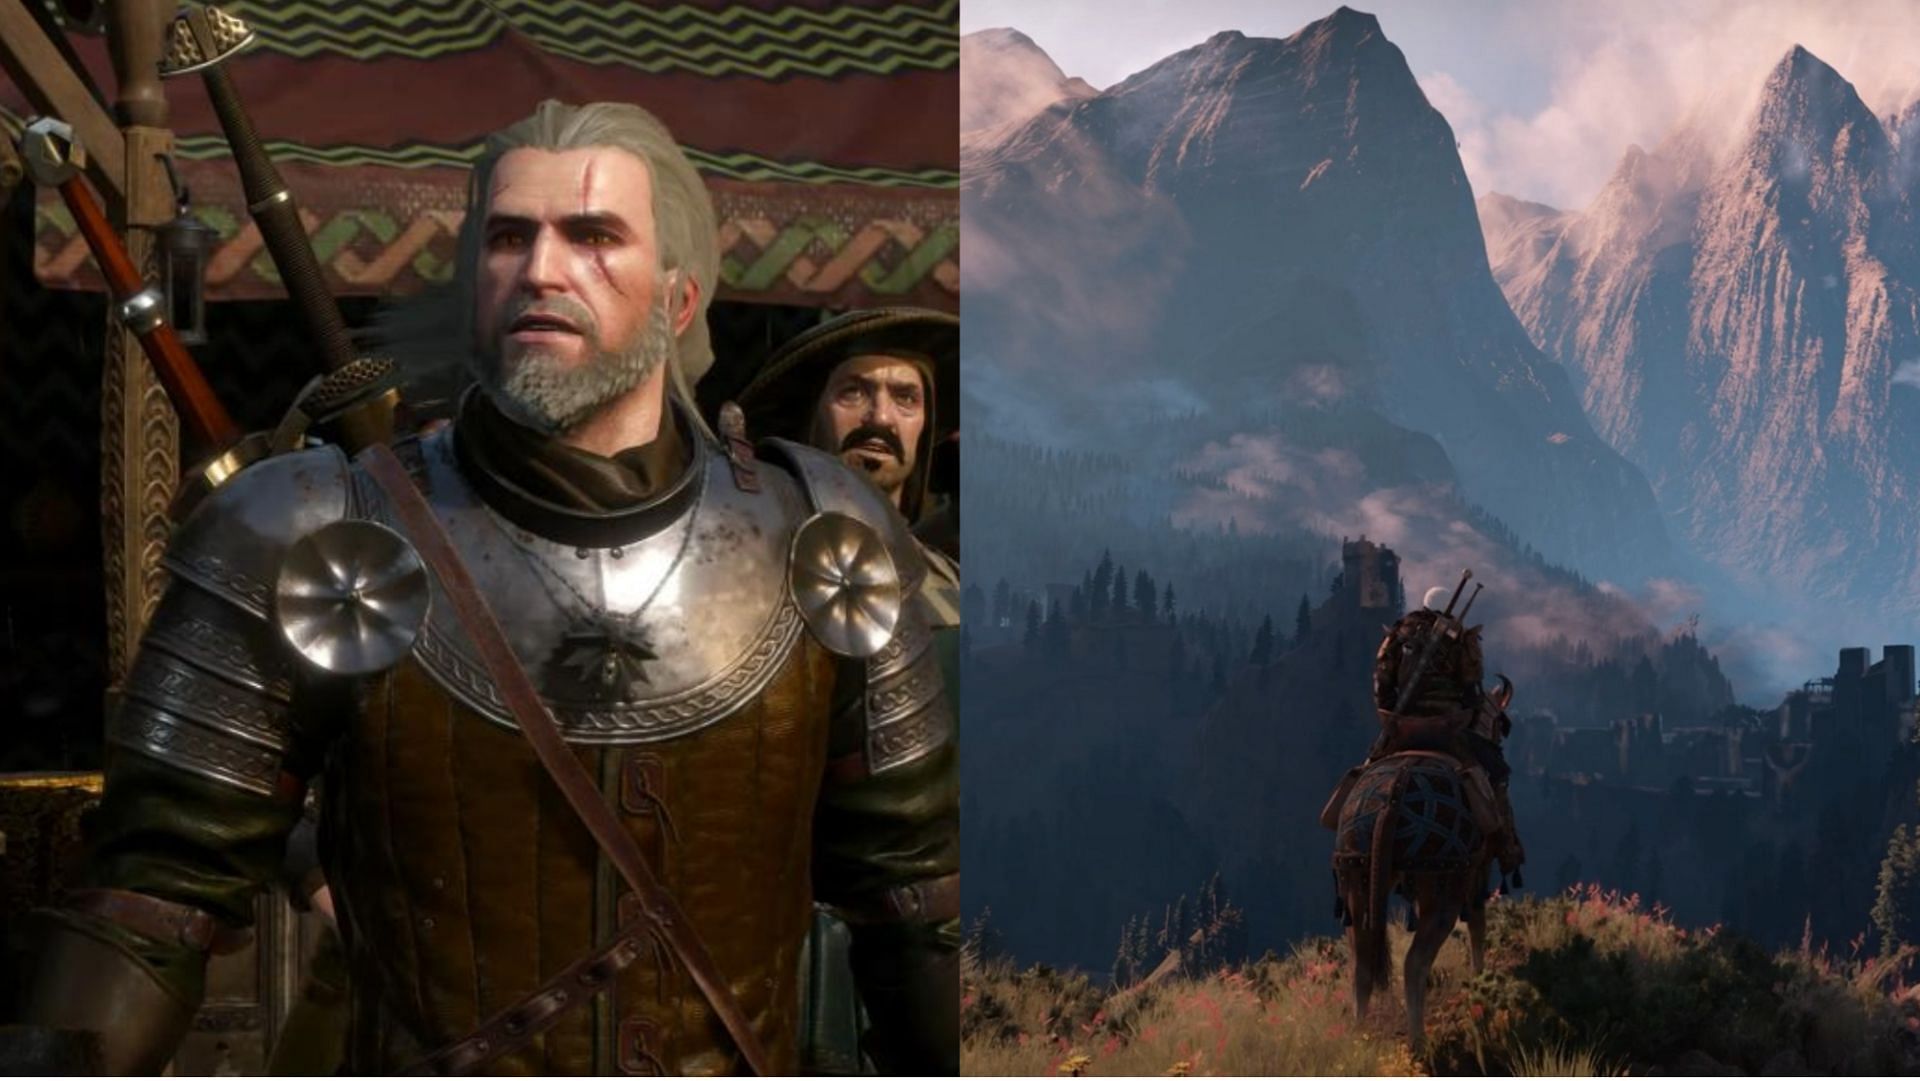 Top 5 changes coming to The Witcher 3 next-gen update